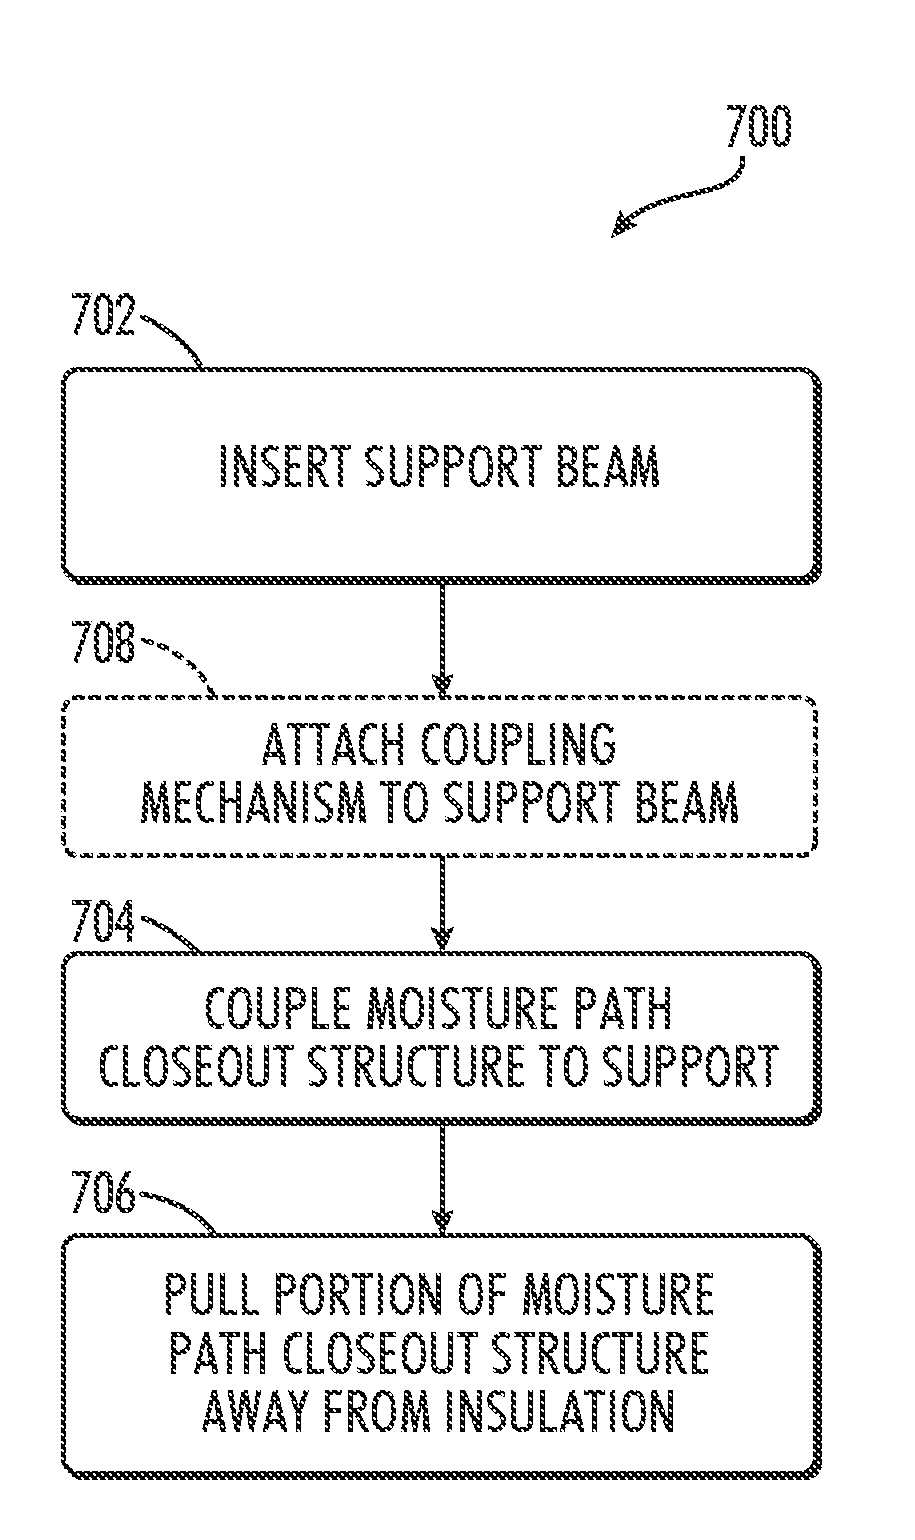 Moisture path close-out and thermal control system and methods of assembling same